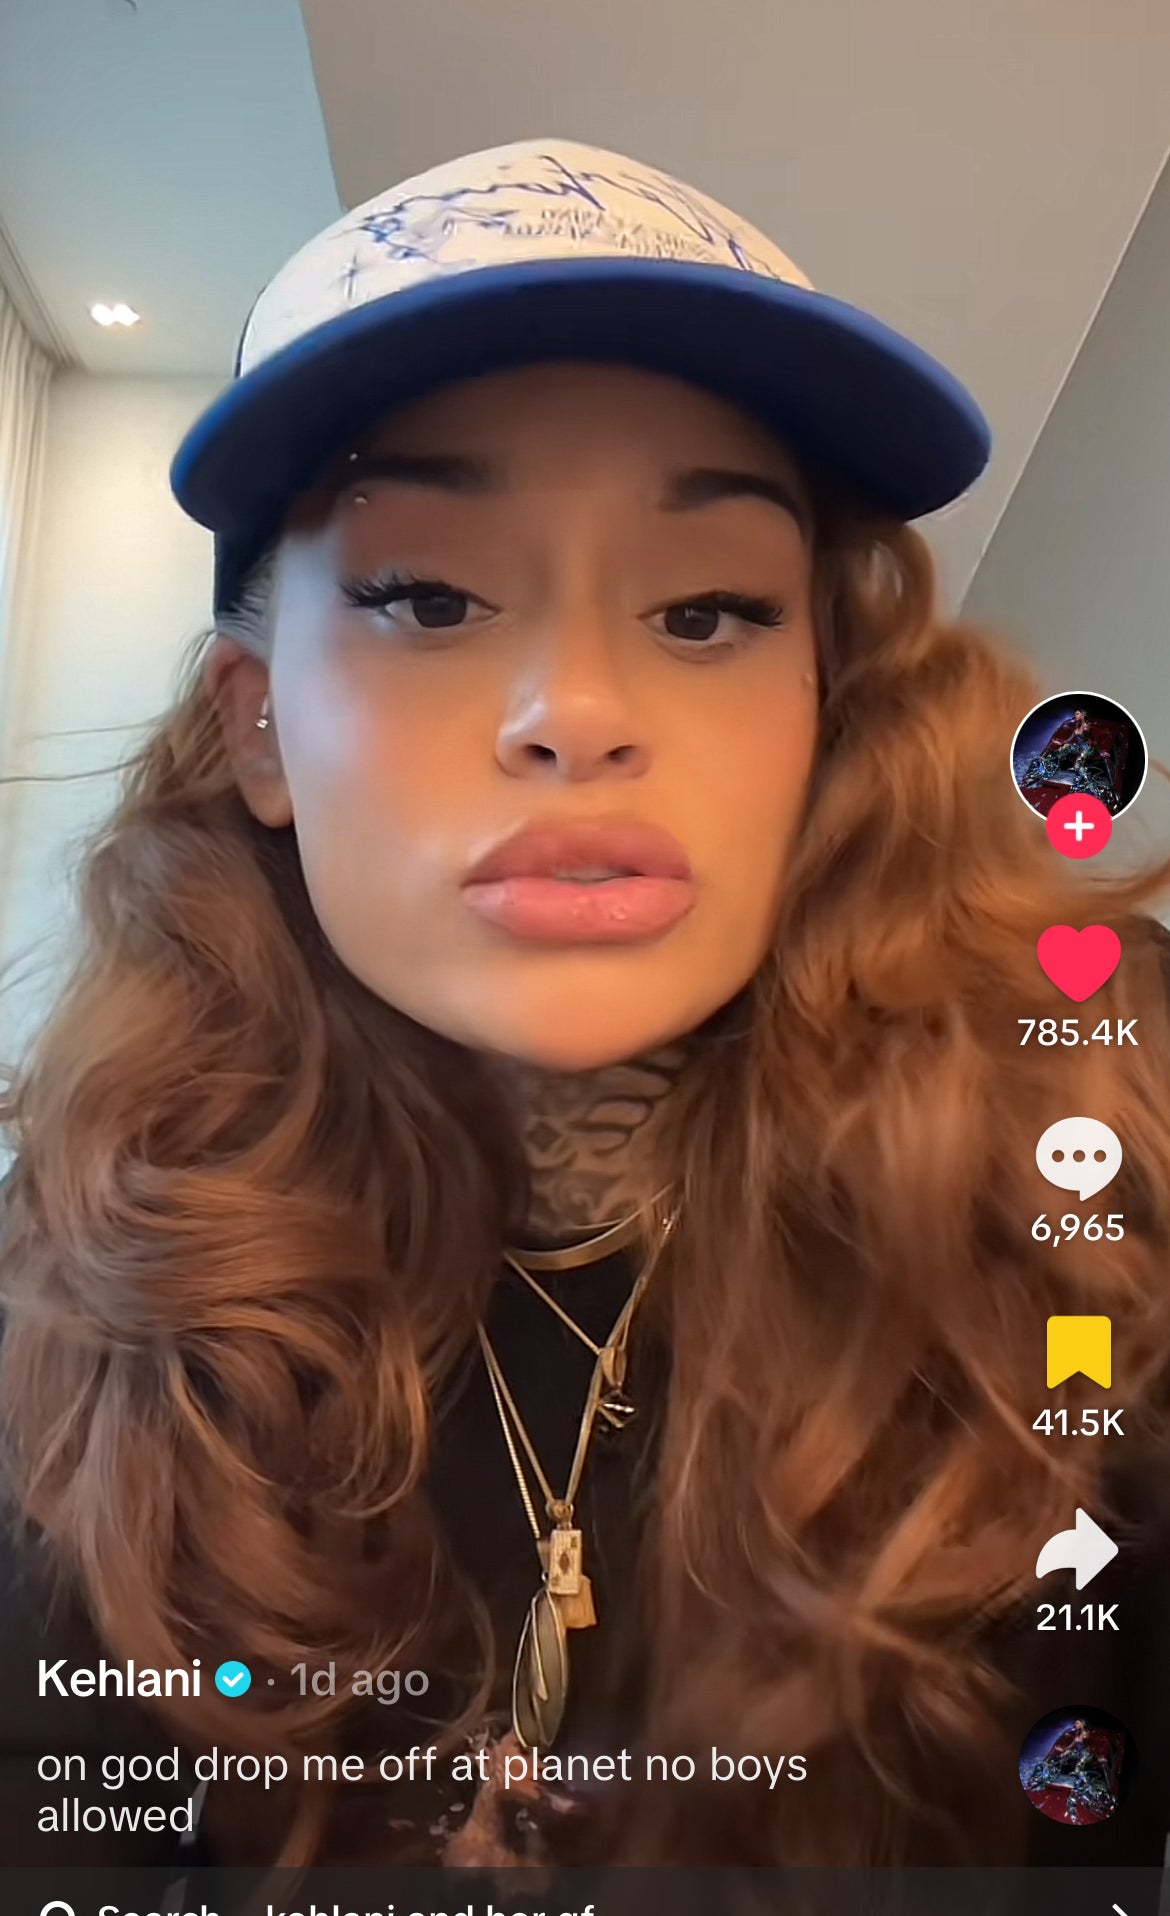 Singer Kehlani wearing a blue and white cap, seen in a TikTok video with the caption, &quot;on god drop me off at planet no boys allowed.&quot; The video has 785.4K likes